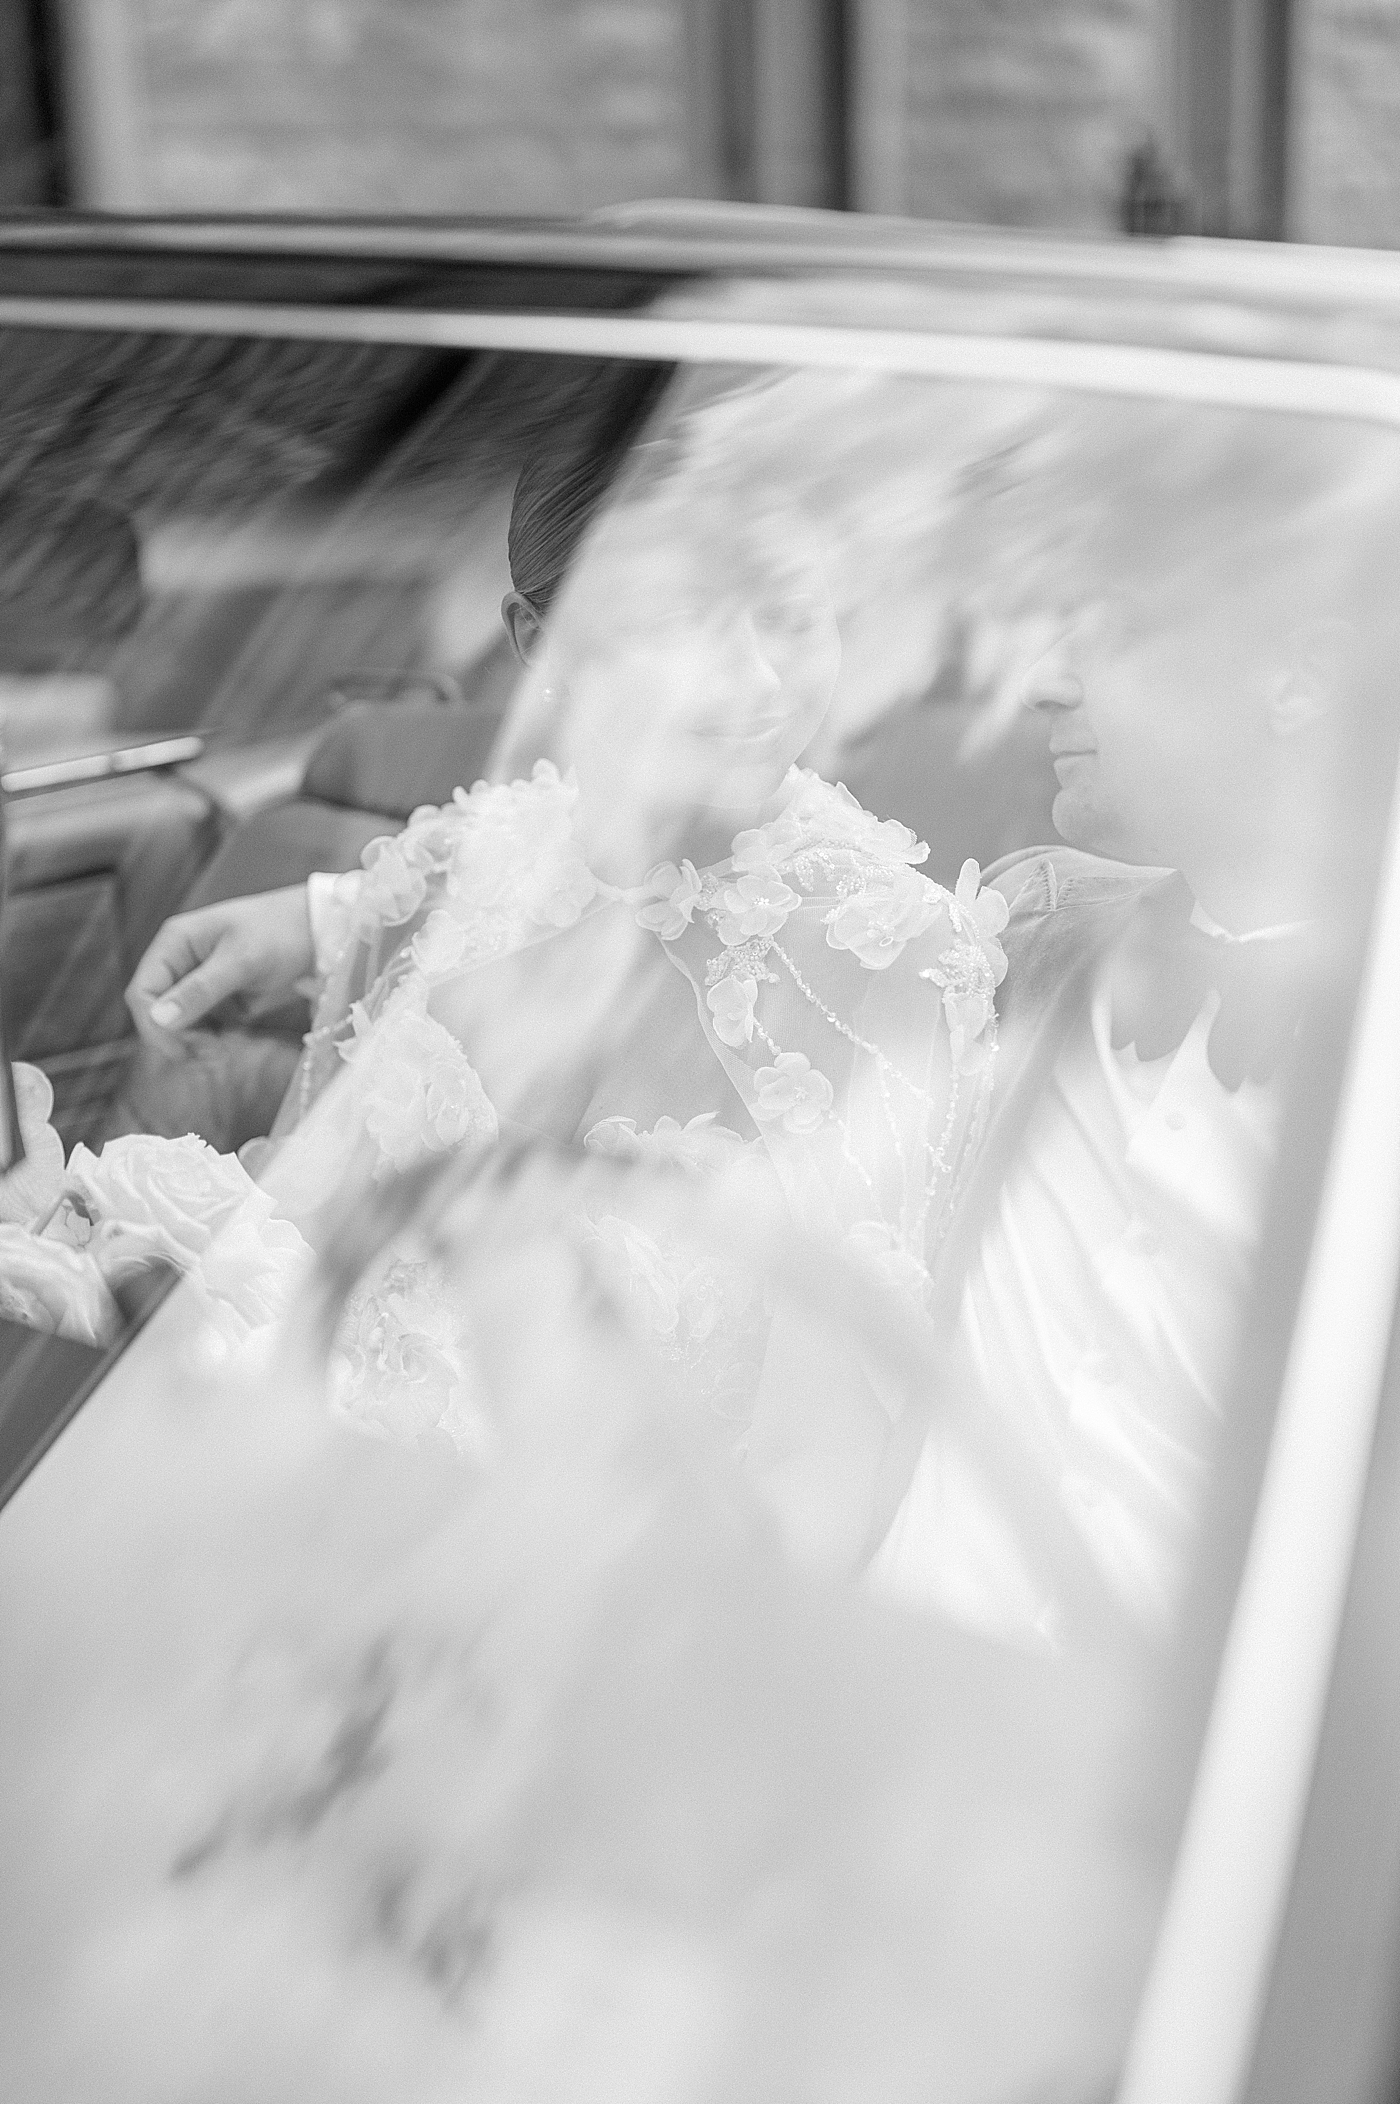 Black and white image of bride and groom behind windshield | Image by Hope Helmuth Photography